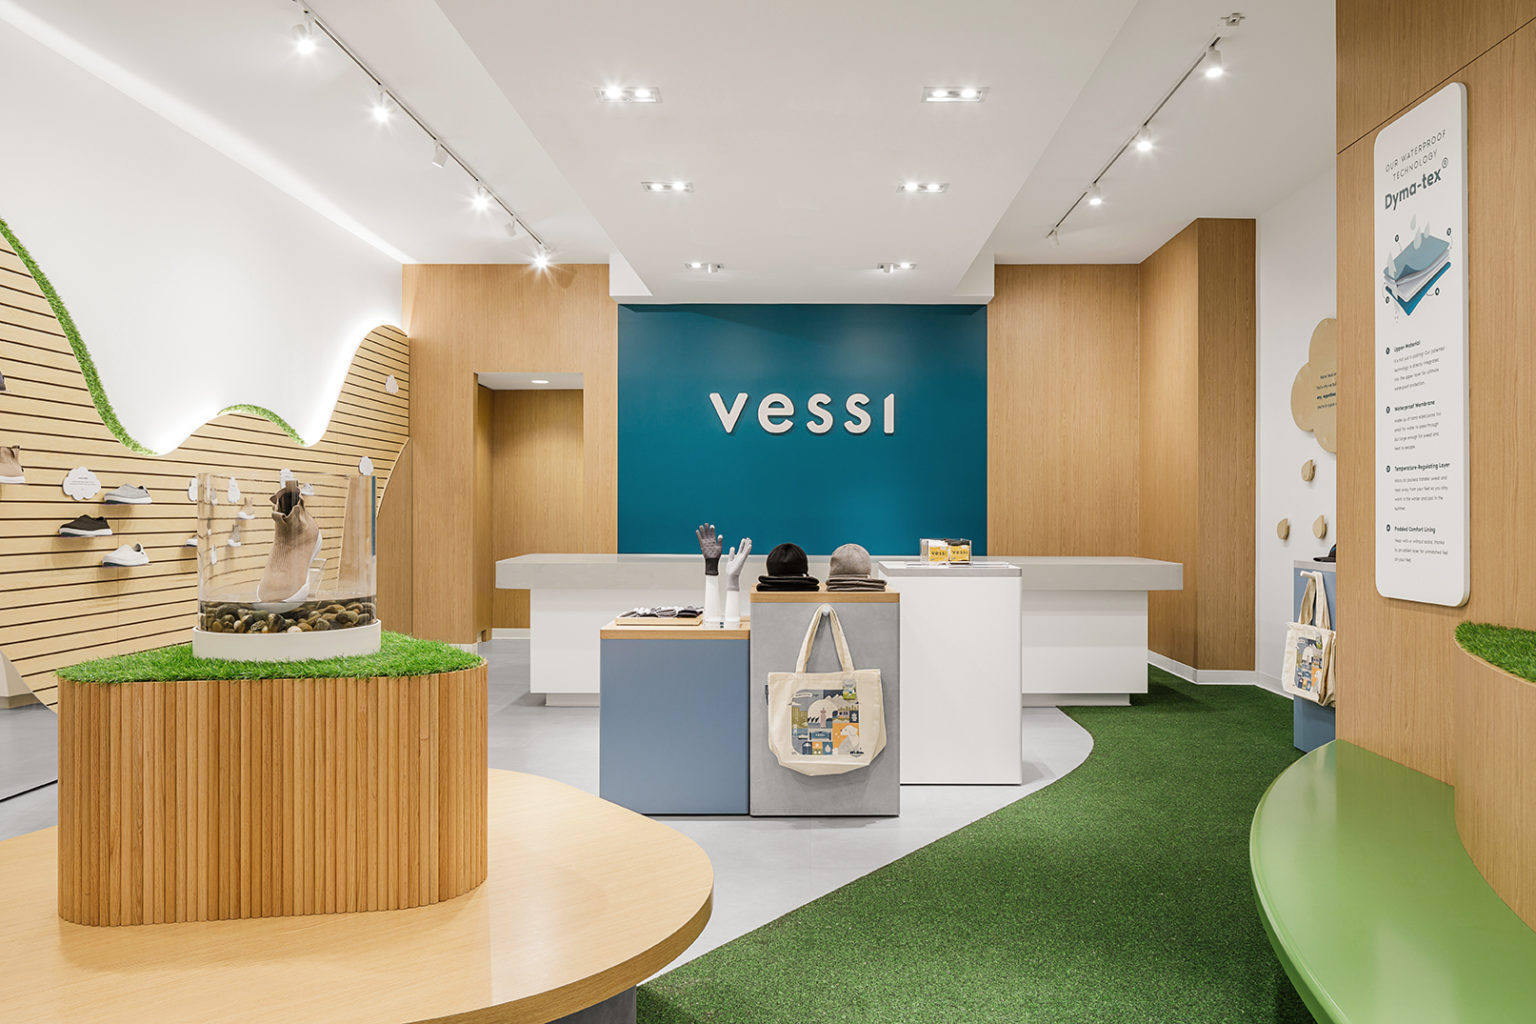 Project: Vessi Interior Design & Architecture in Metropolis at Metrotown, Burnaby BC 